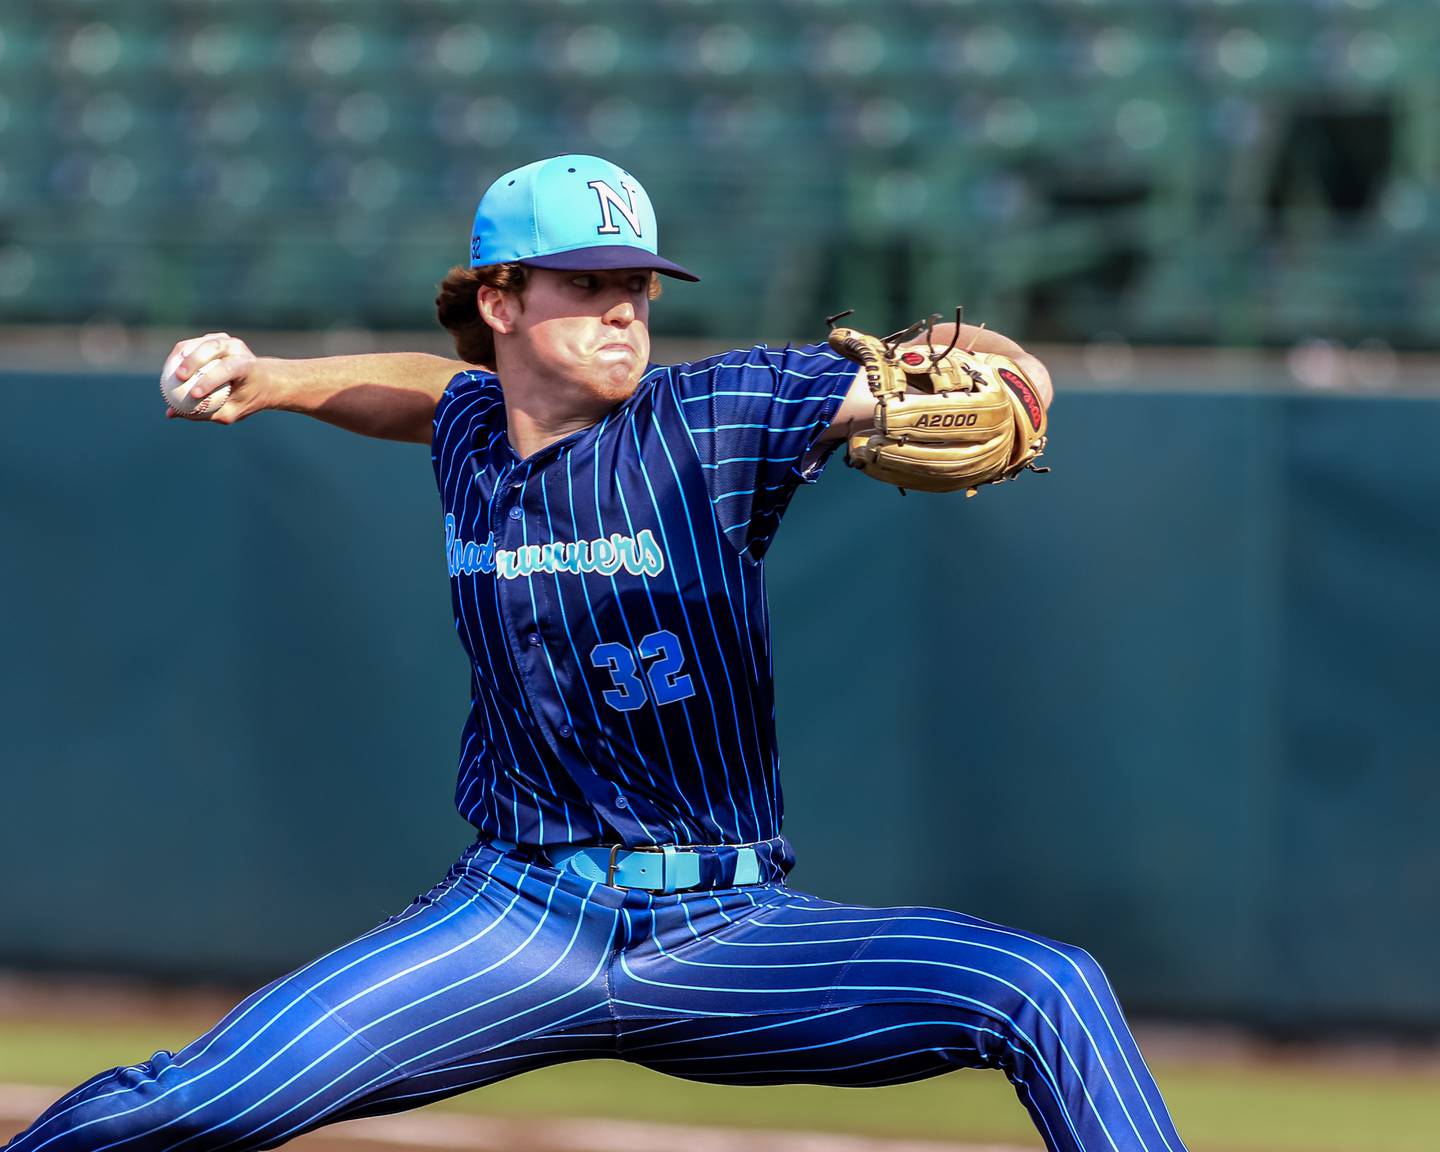 Nazareth's Finn O 'Meara (32) delivers a pitch during the Class 3A Crestwood Supersectional game between St. Ignatius at Nazareth.  June 6, 2022.